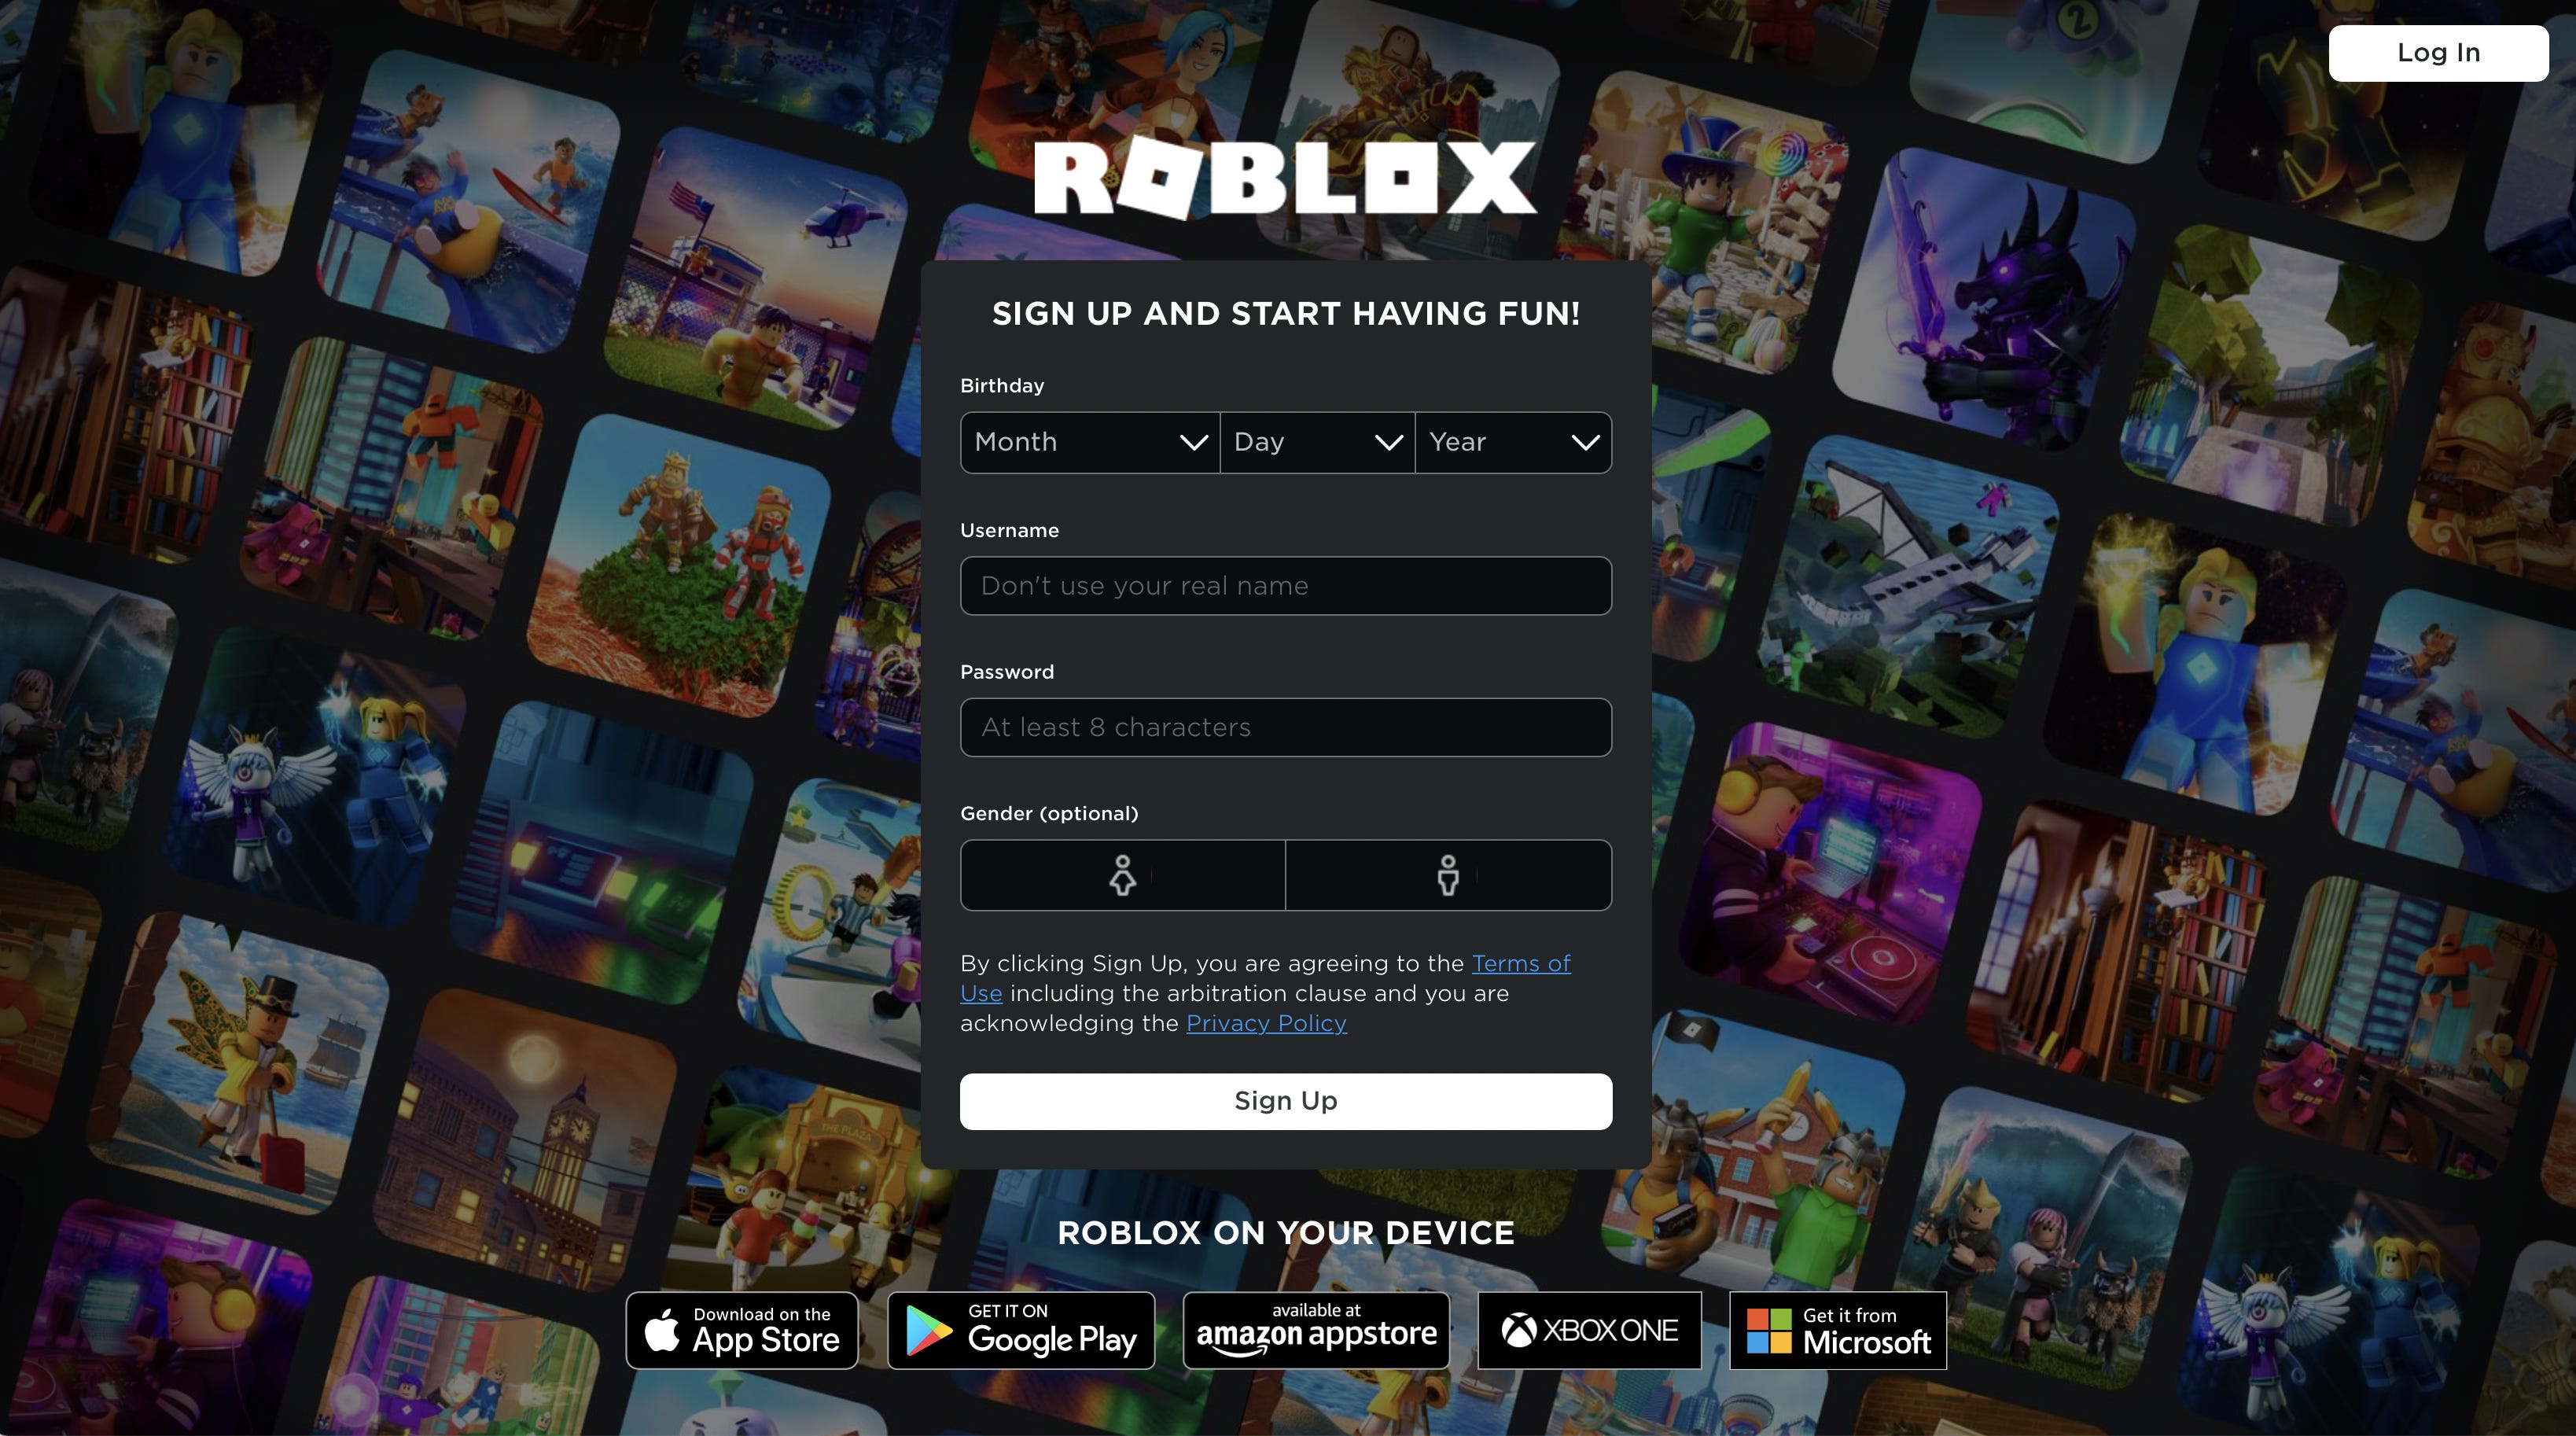 Roblox S Growth Strategies And Why Becoming A Metaverse Is A Bad Idea By Benjamin Schroeder No Ordinary Strategy - game engines like roblox